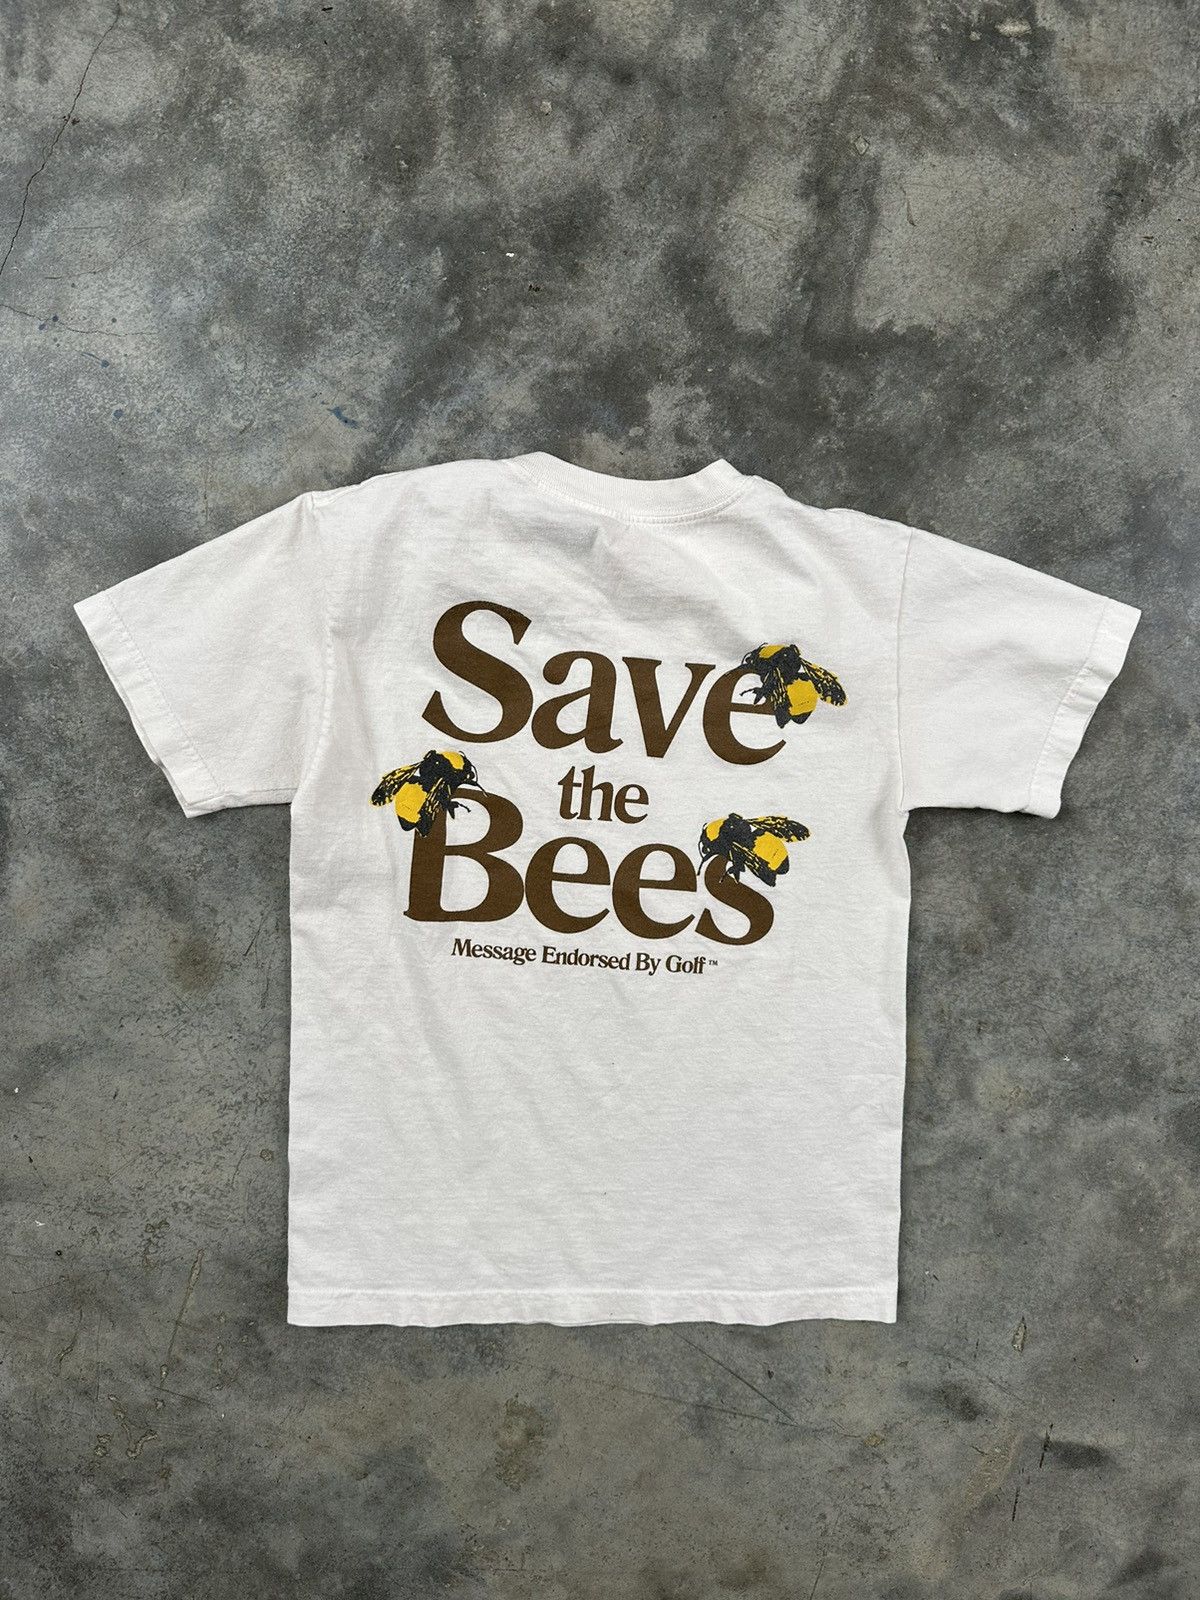 Pre-owned Golf Wang "save The Bees" White Logo Tee Sz. Small / Igor